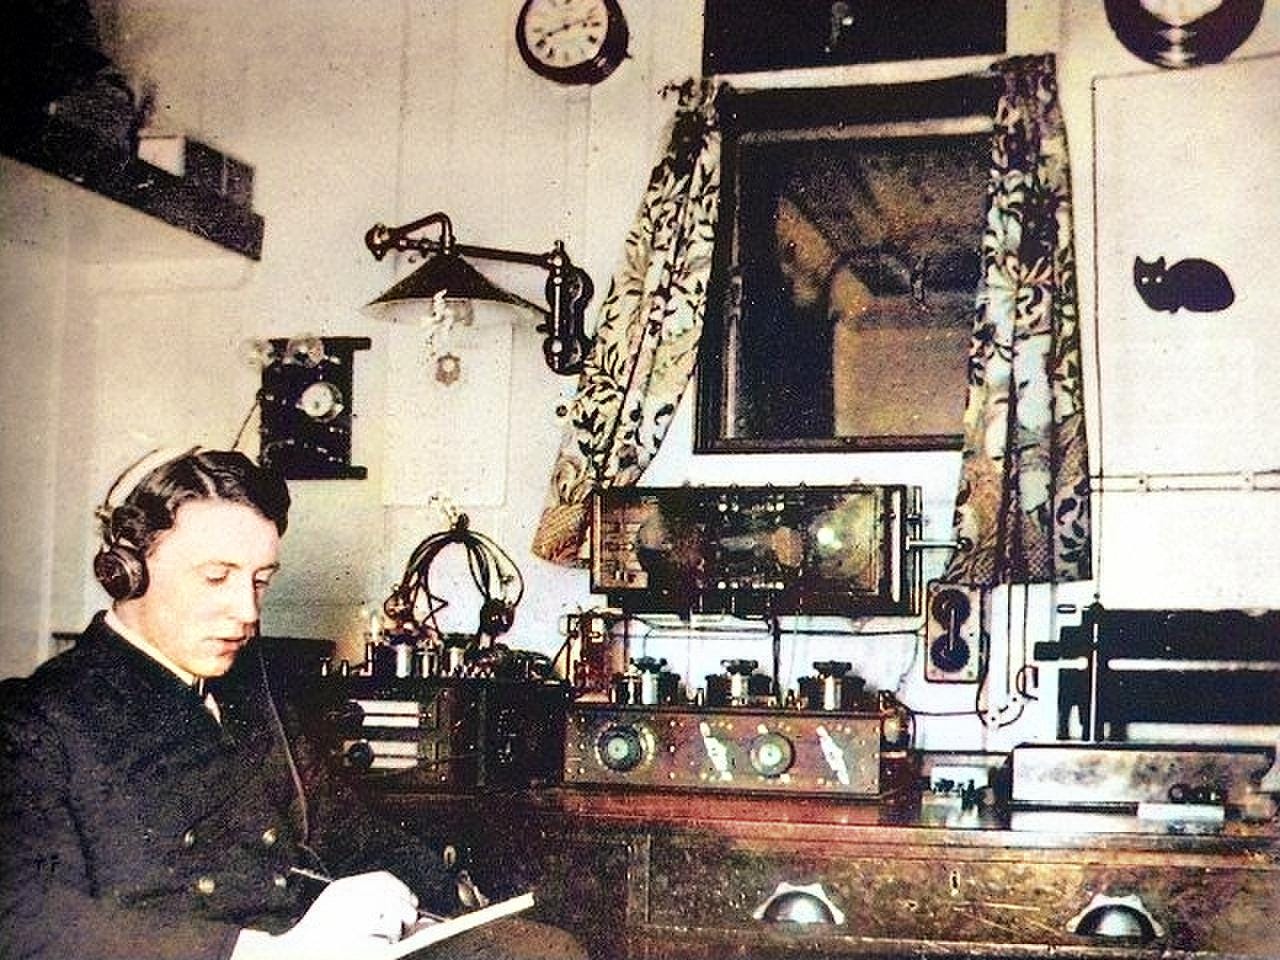 A young man wearing headphones in a lace-curtained room with radio equipment: everything old-fashioned, naturally, as the photo was taken in 1913.